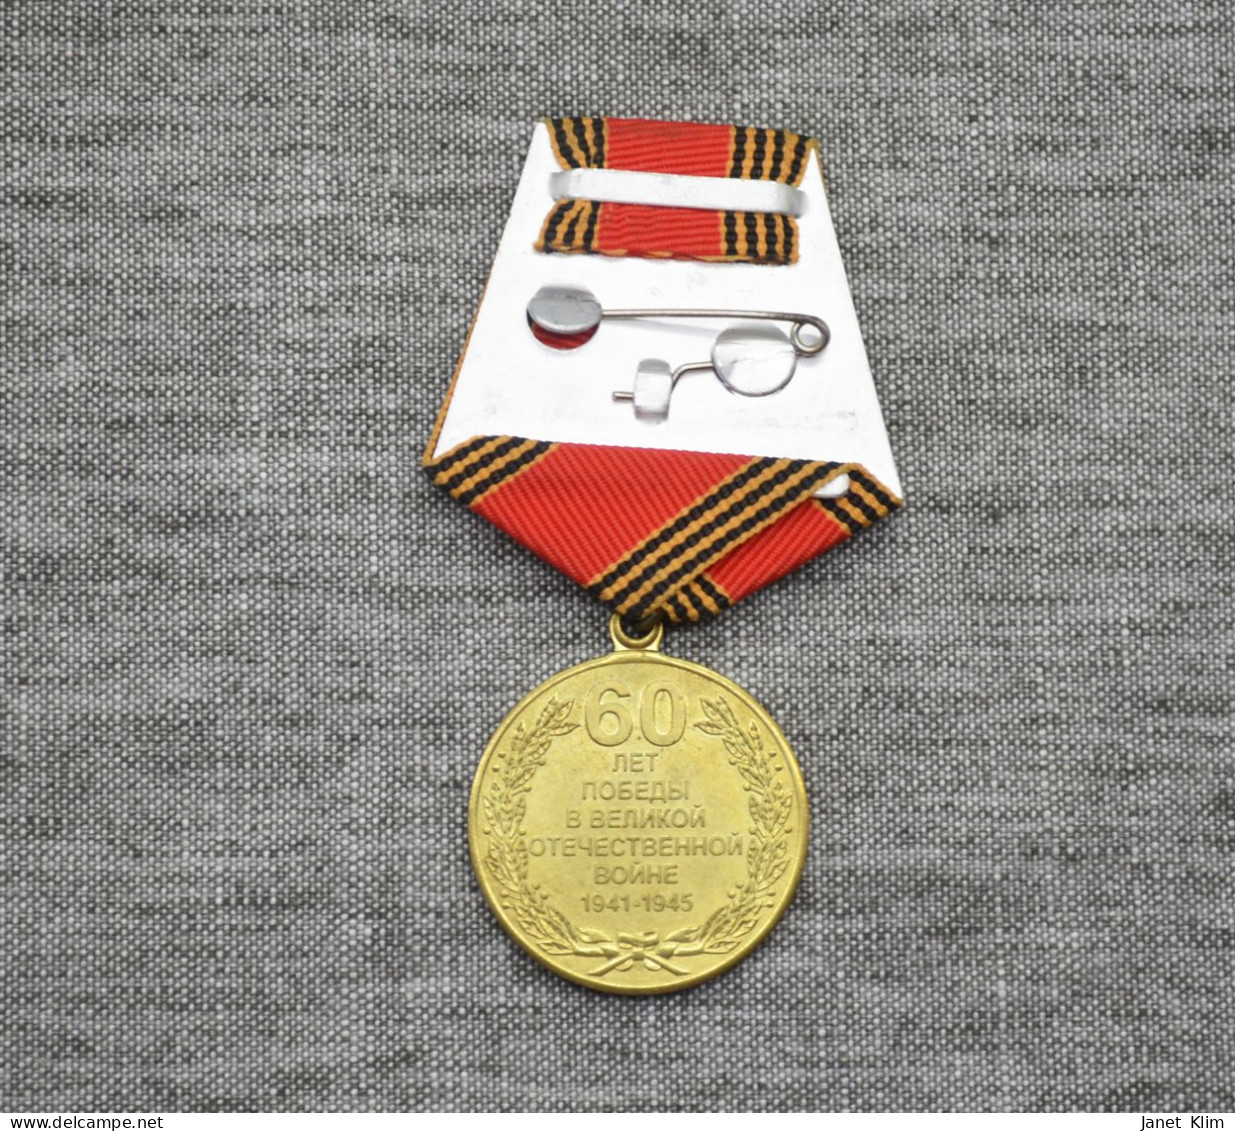 Vintage-Medal USSR-60 Years Of Victory In World War II - Russia